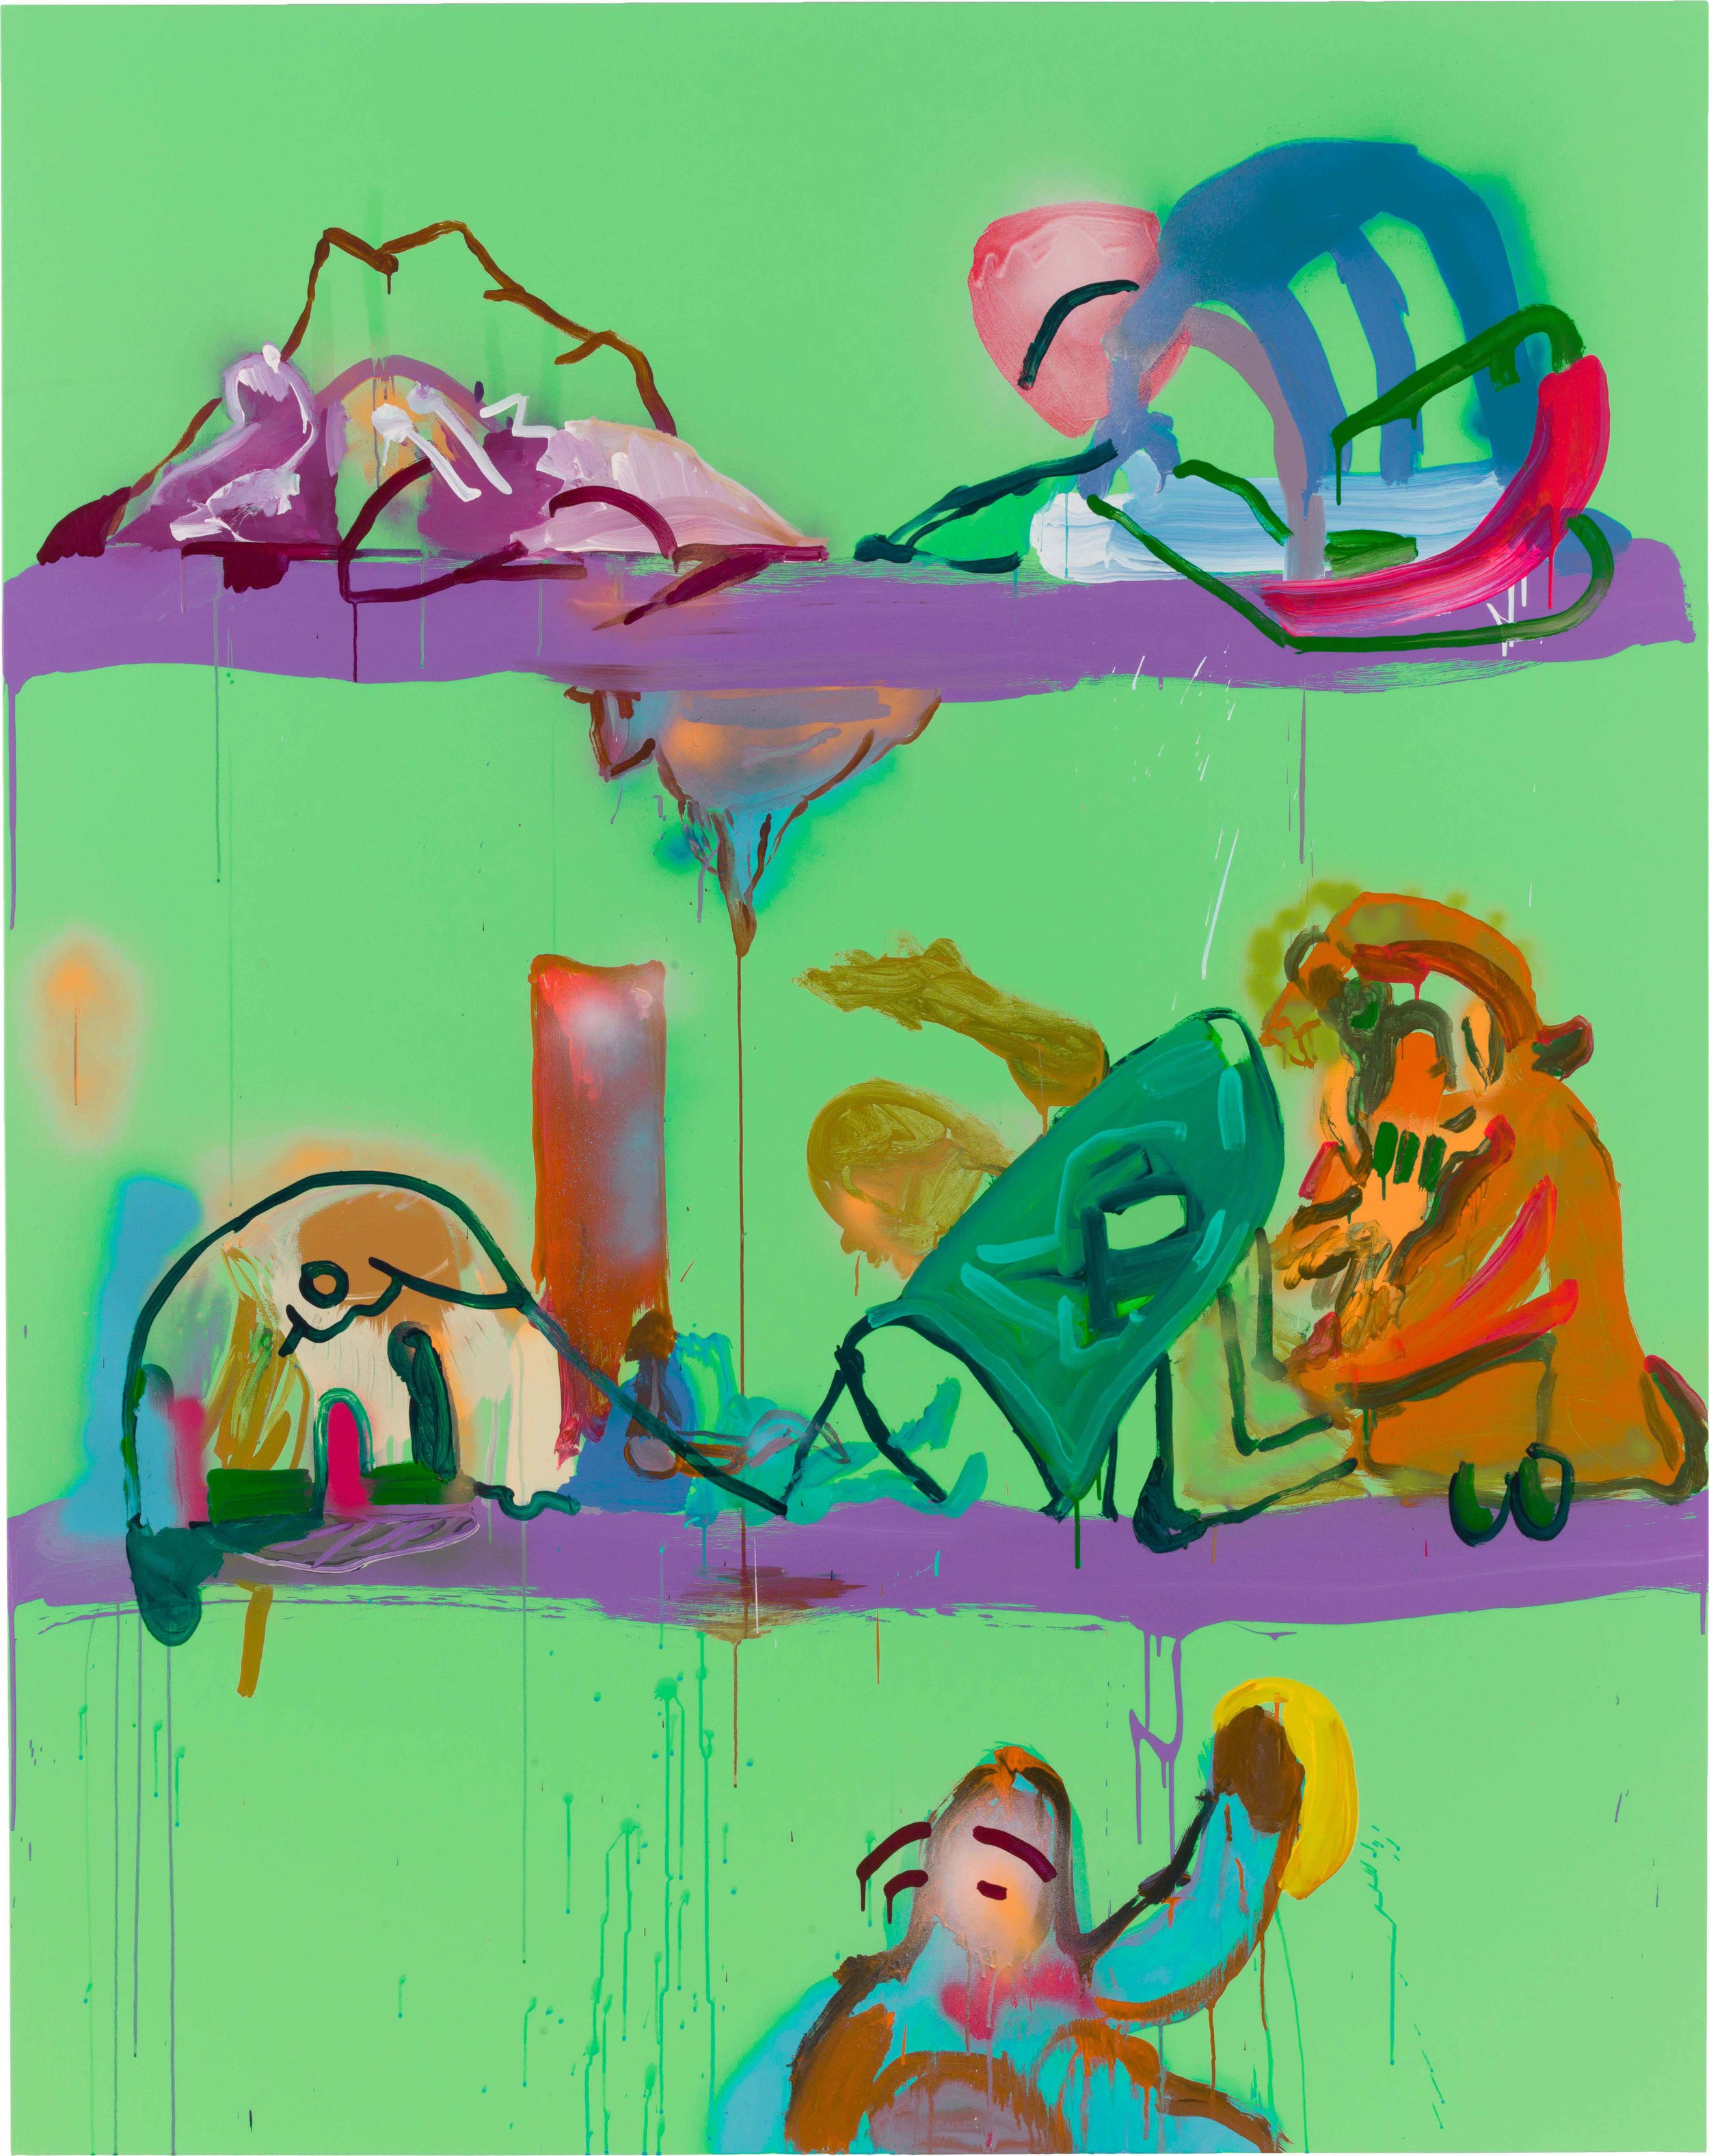  Drew Beattie and Ben Shepard  Shelves on Green  2014 acrylic and spray paint on canvas 96 x 76 inches 